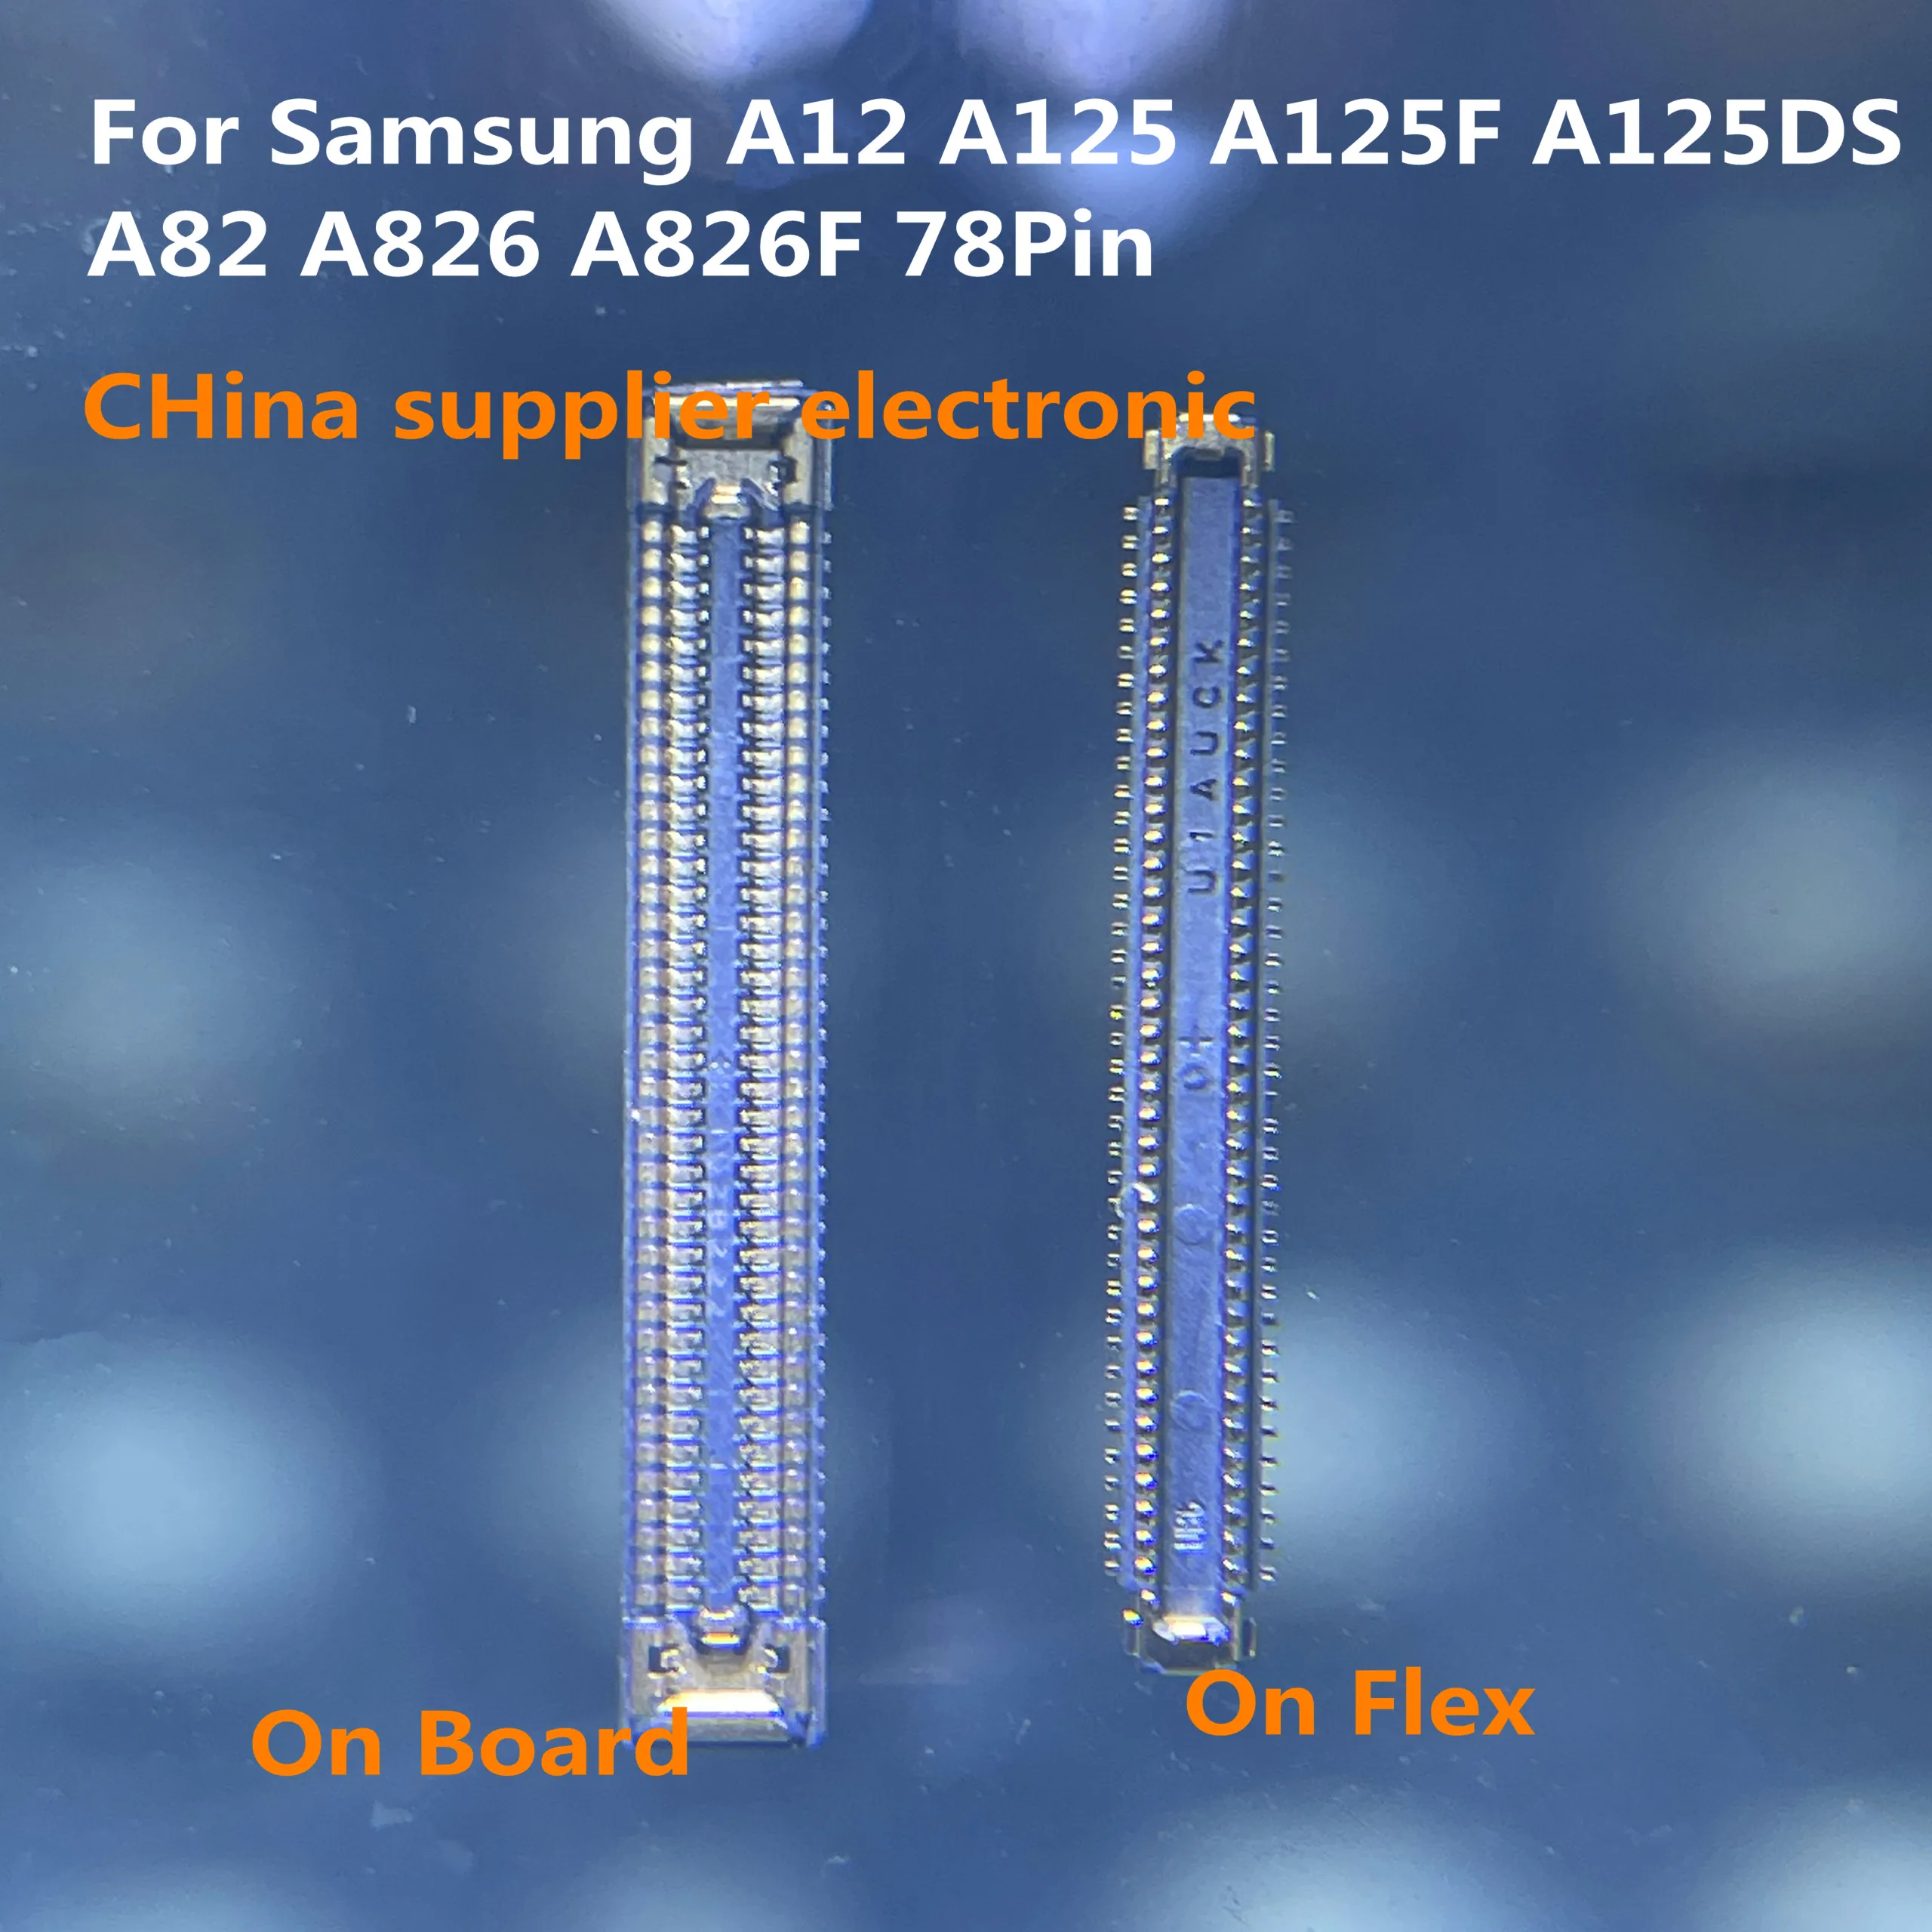 

10pcs-50pcs For Samsung Galaxy A12 A125 A125F A125DS A82 A826 A826F LCD Display Screen FPC Connector Port On Mainboard/ Flex Cab